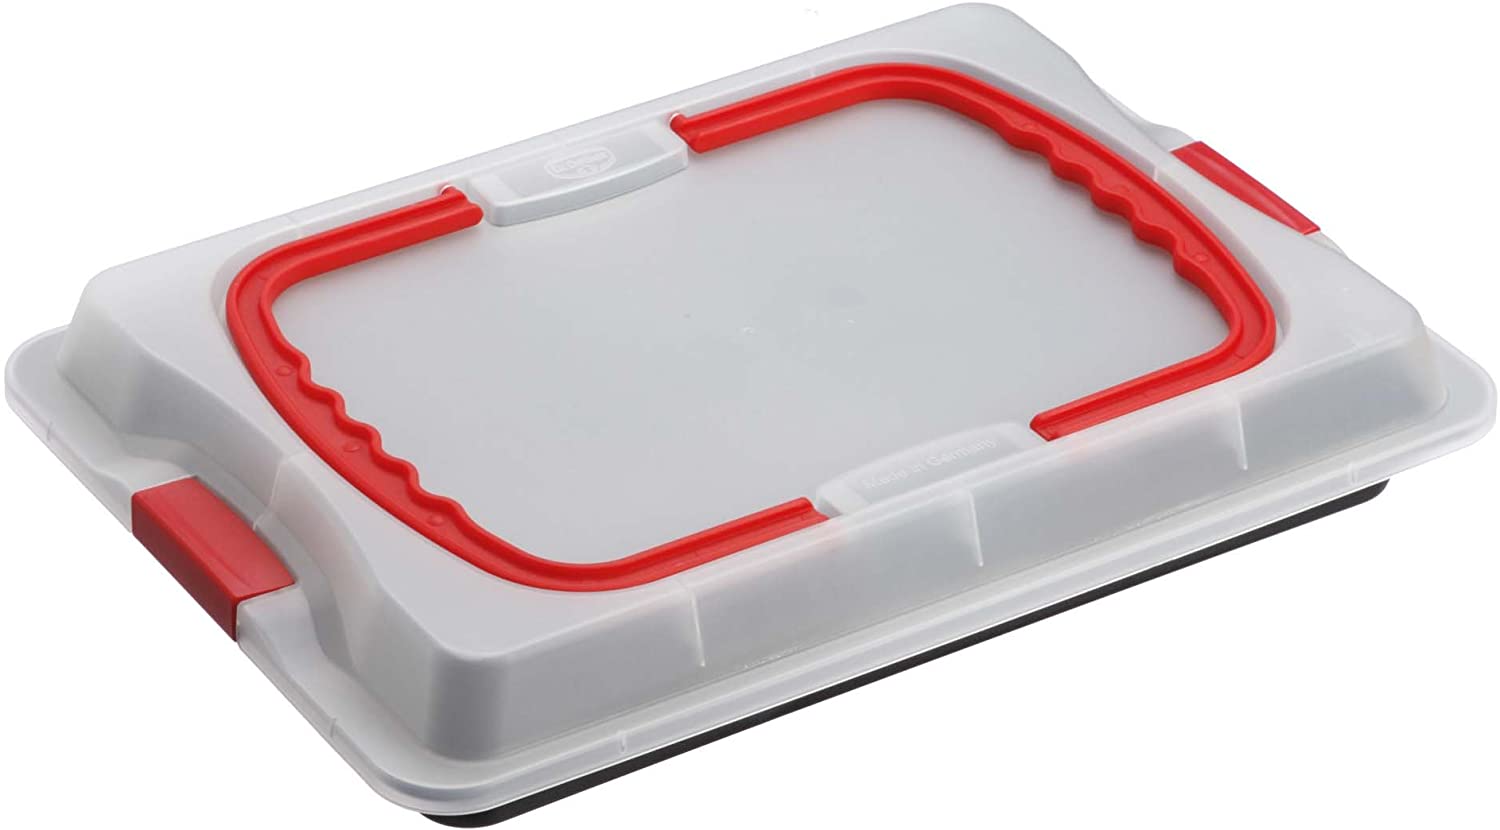 Dr. Oetker 1012 baking tray 3in1 with transport cover, oven tray for baking, storing & transporting, as pizza, casserole & cake tray, dimensions: 42 x 29 cm anthracite